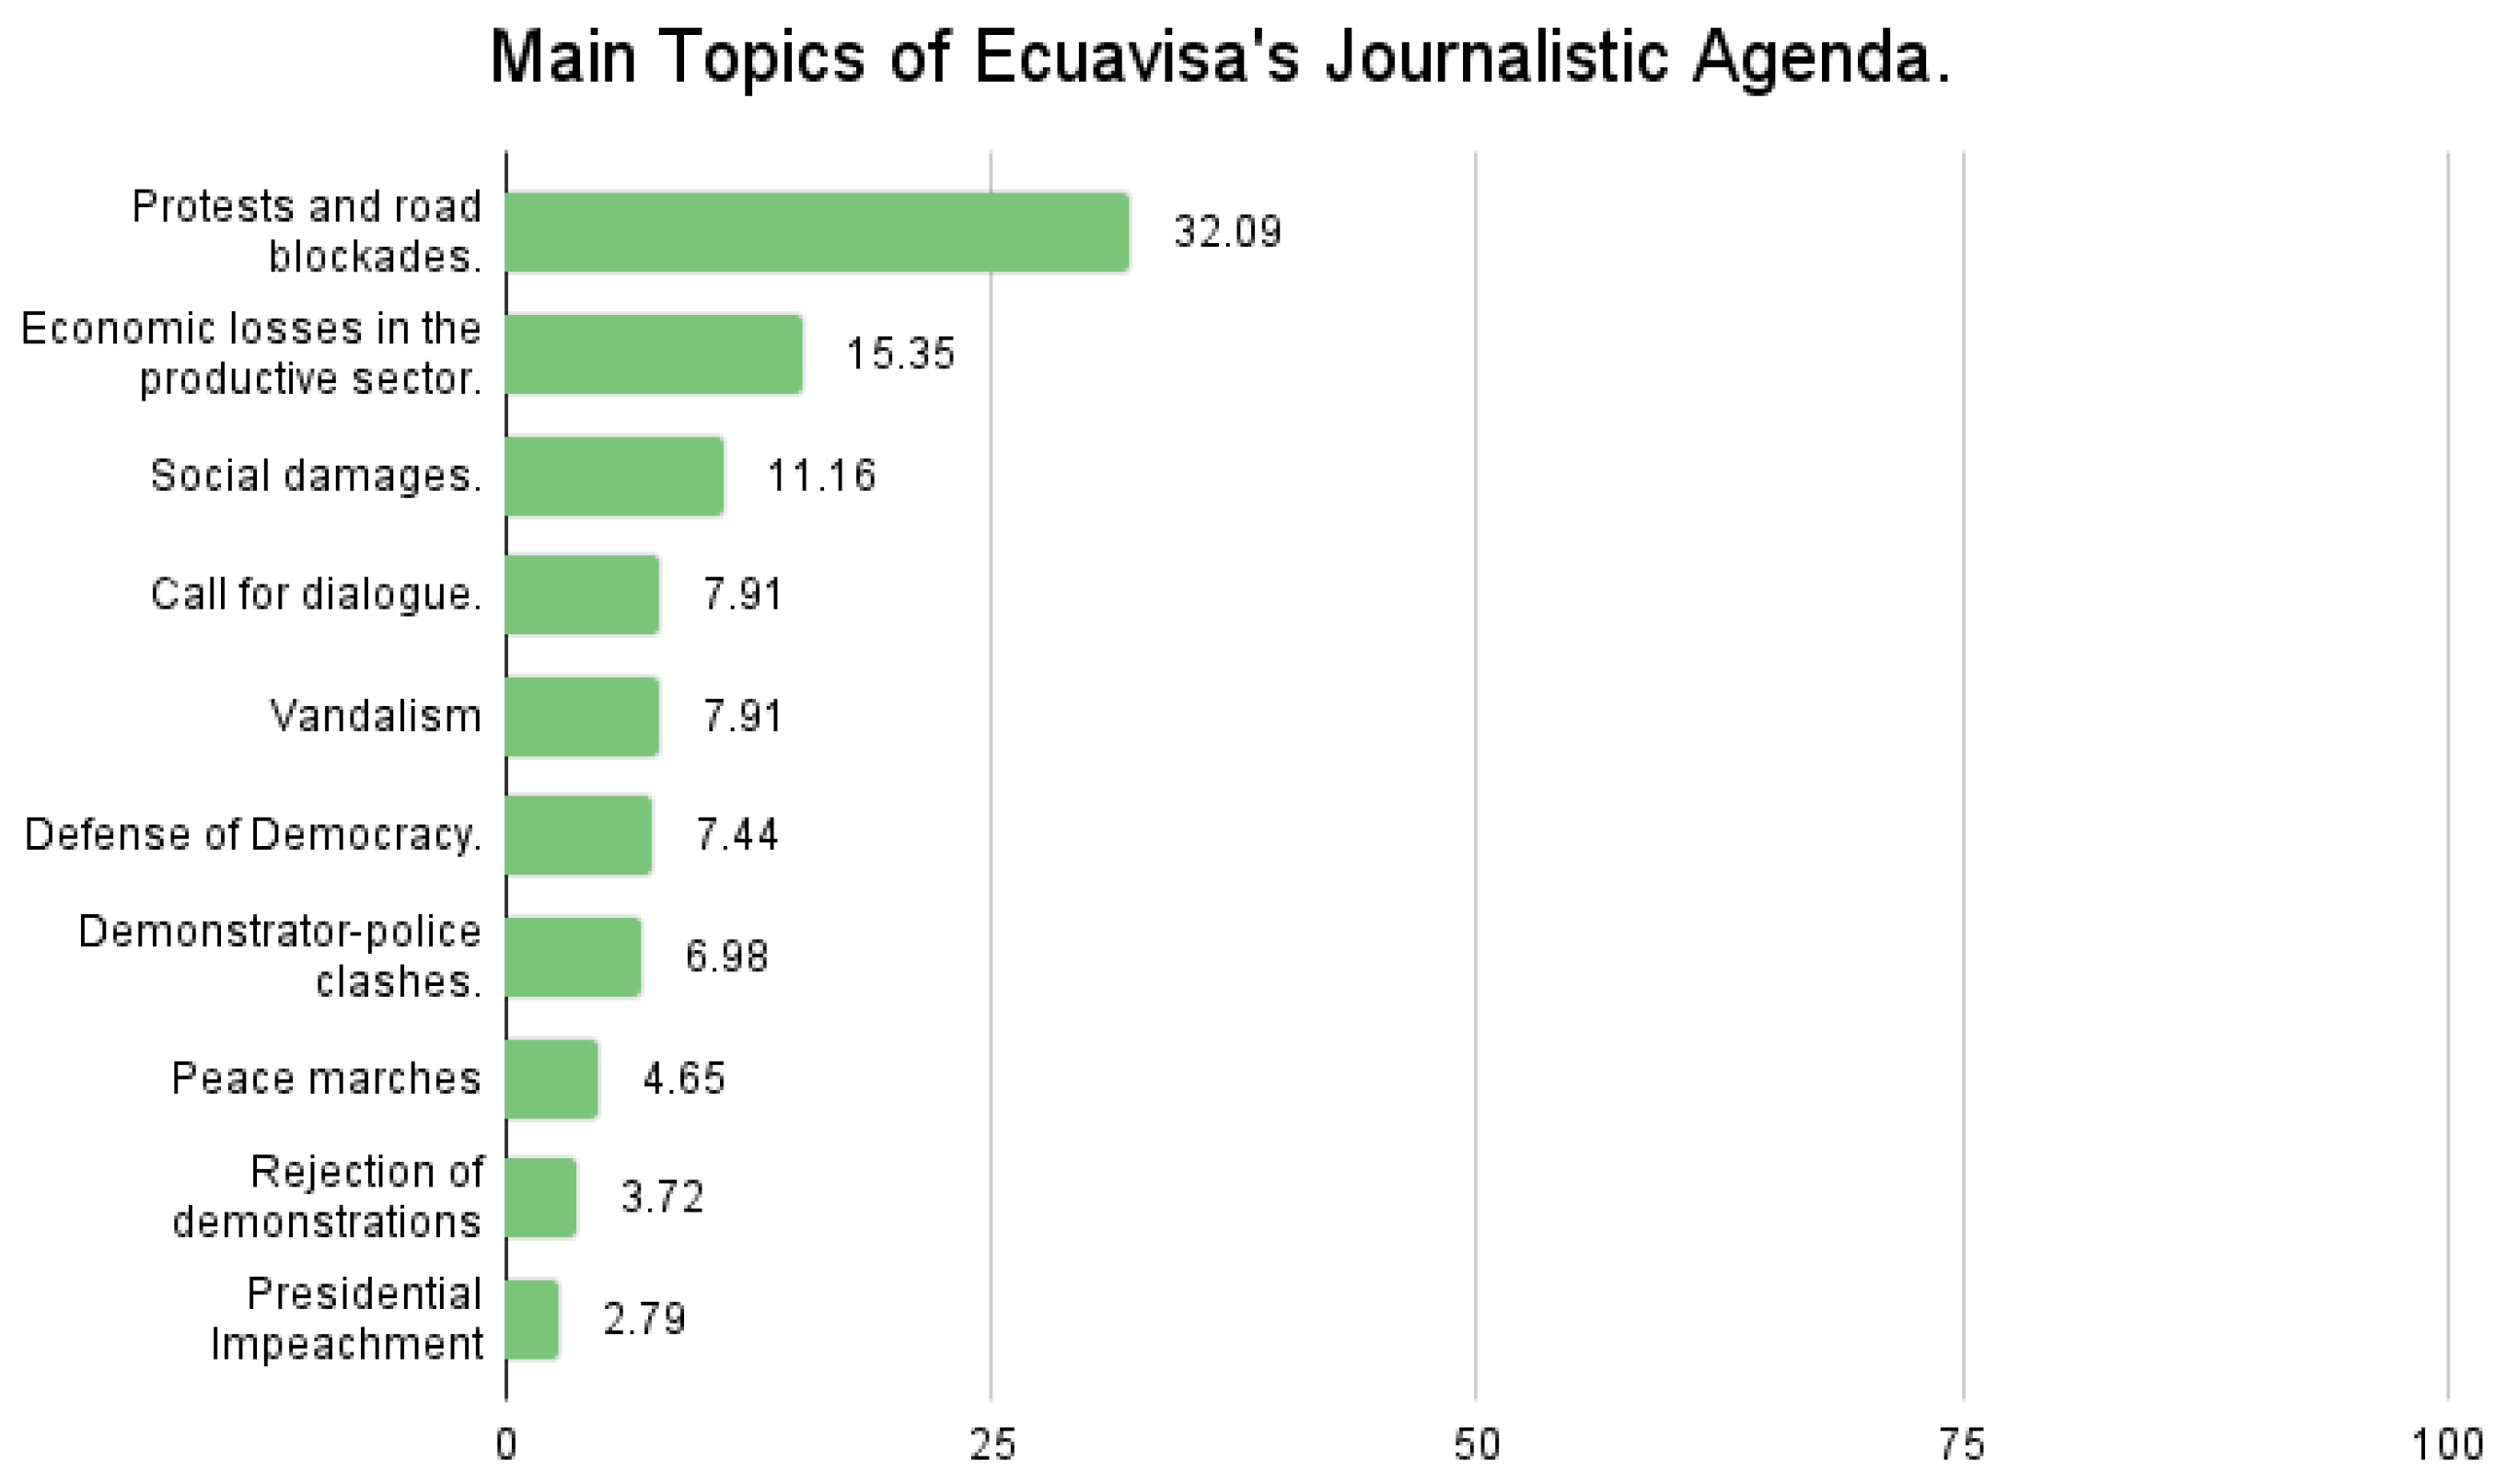 Social Sciences | Free Full-Text | Comparative Analysis of the Journalistic  Agenda between Corporate and Community Media in Ecuador National Strike 2022